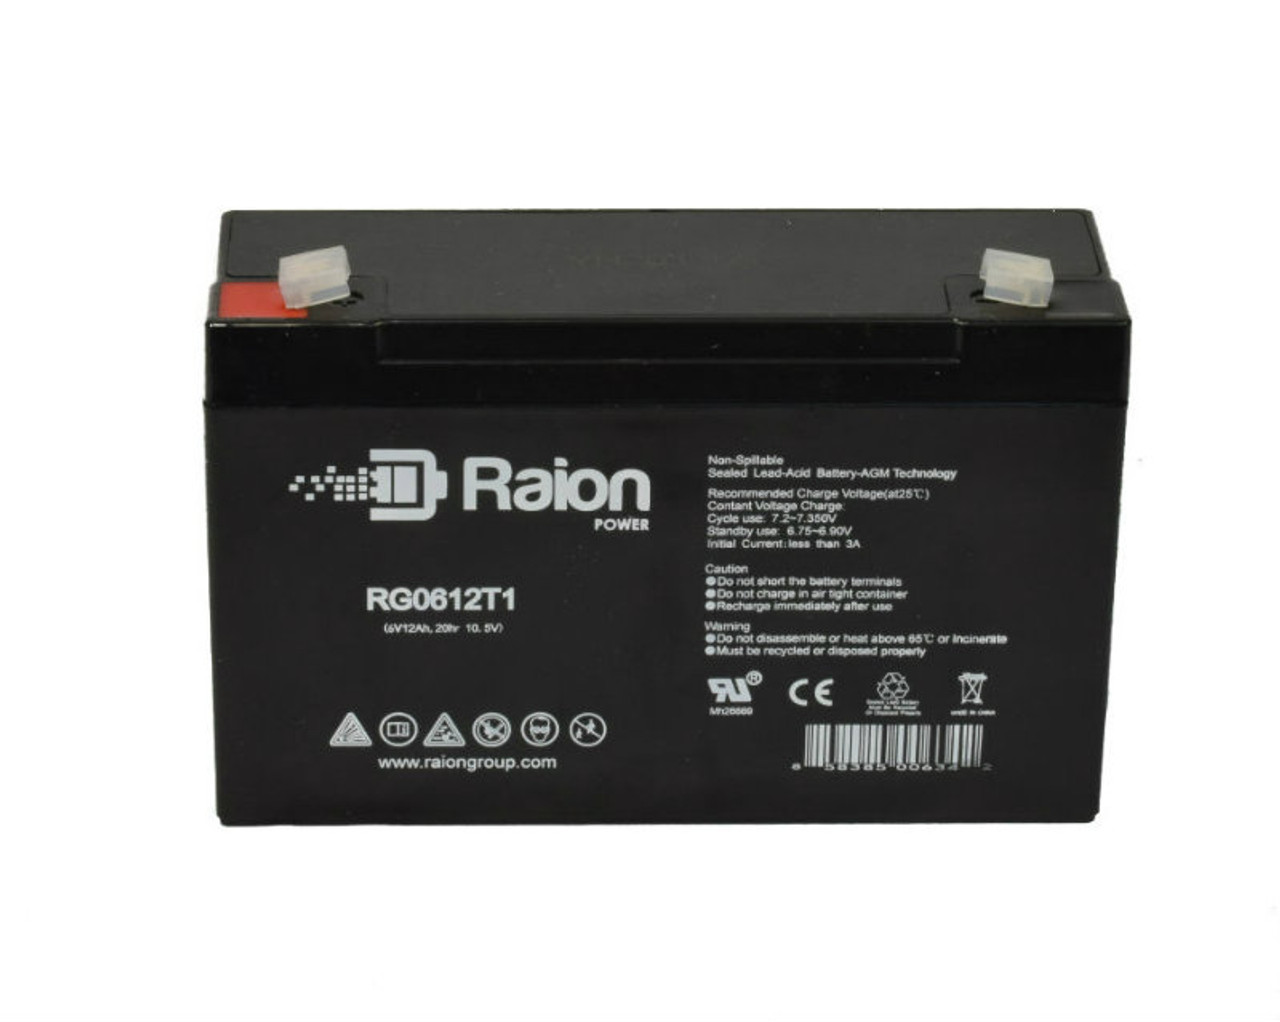 Raion Power RG06120T1 Replacement Battery Cartridge for Sola S32200